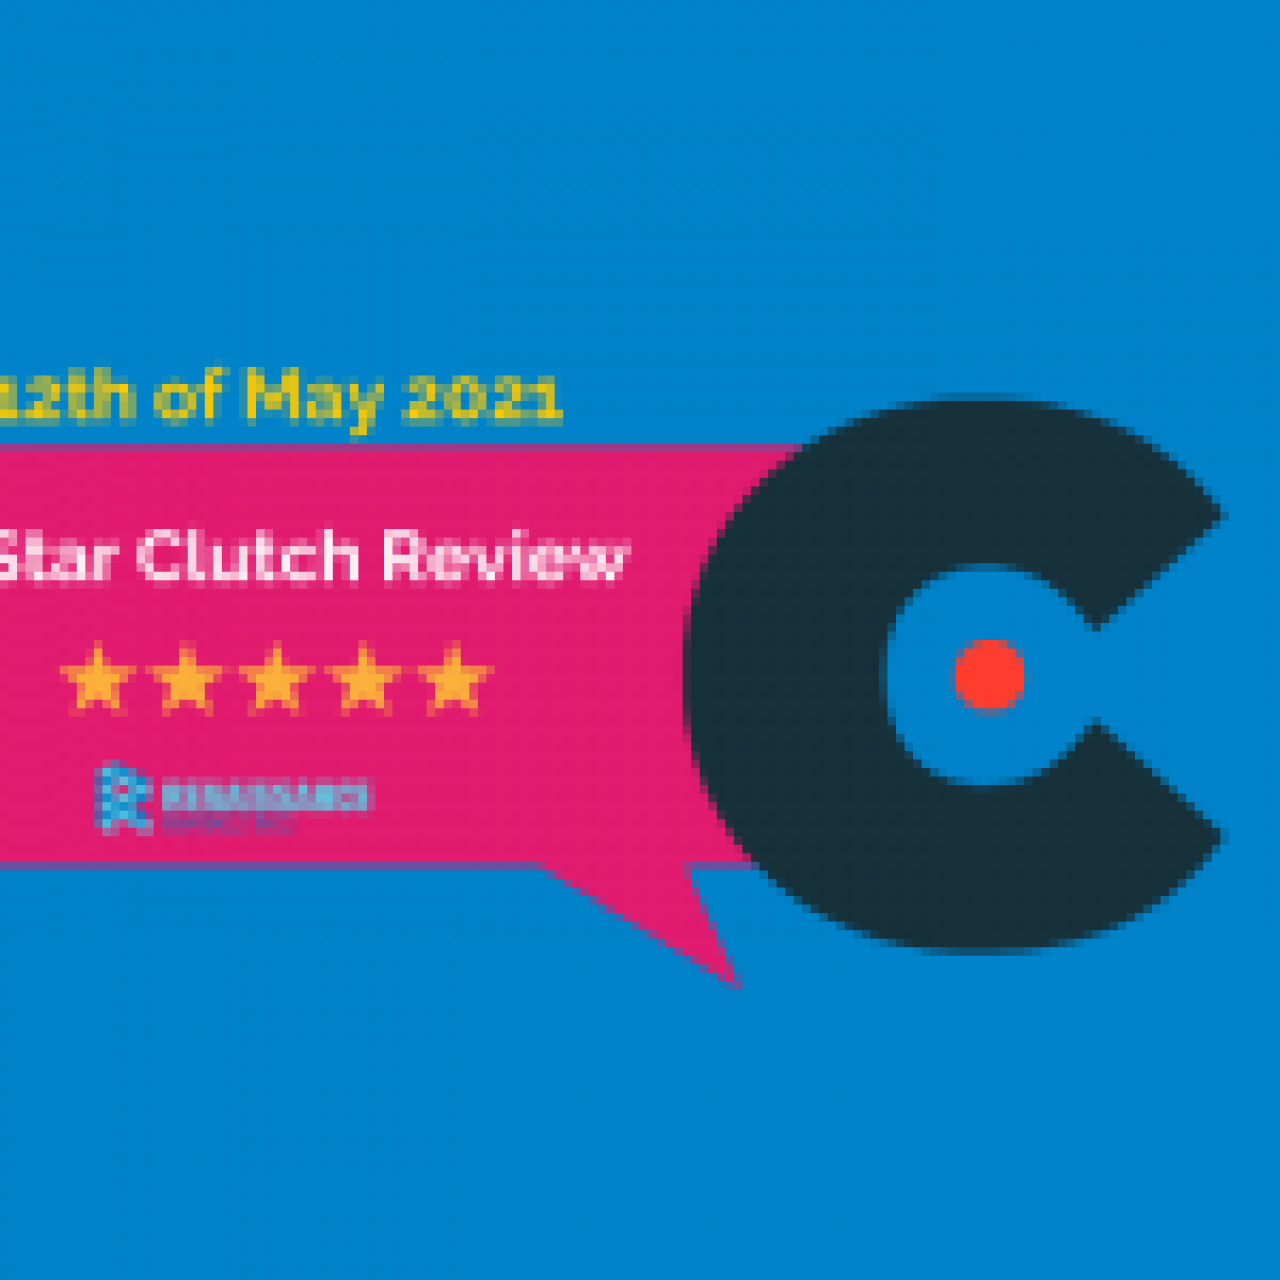 5 star rating of clutch co logo in blue pink and black color